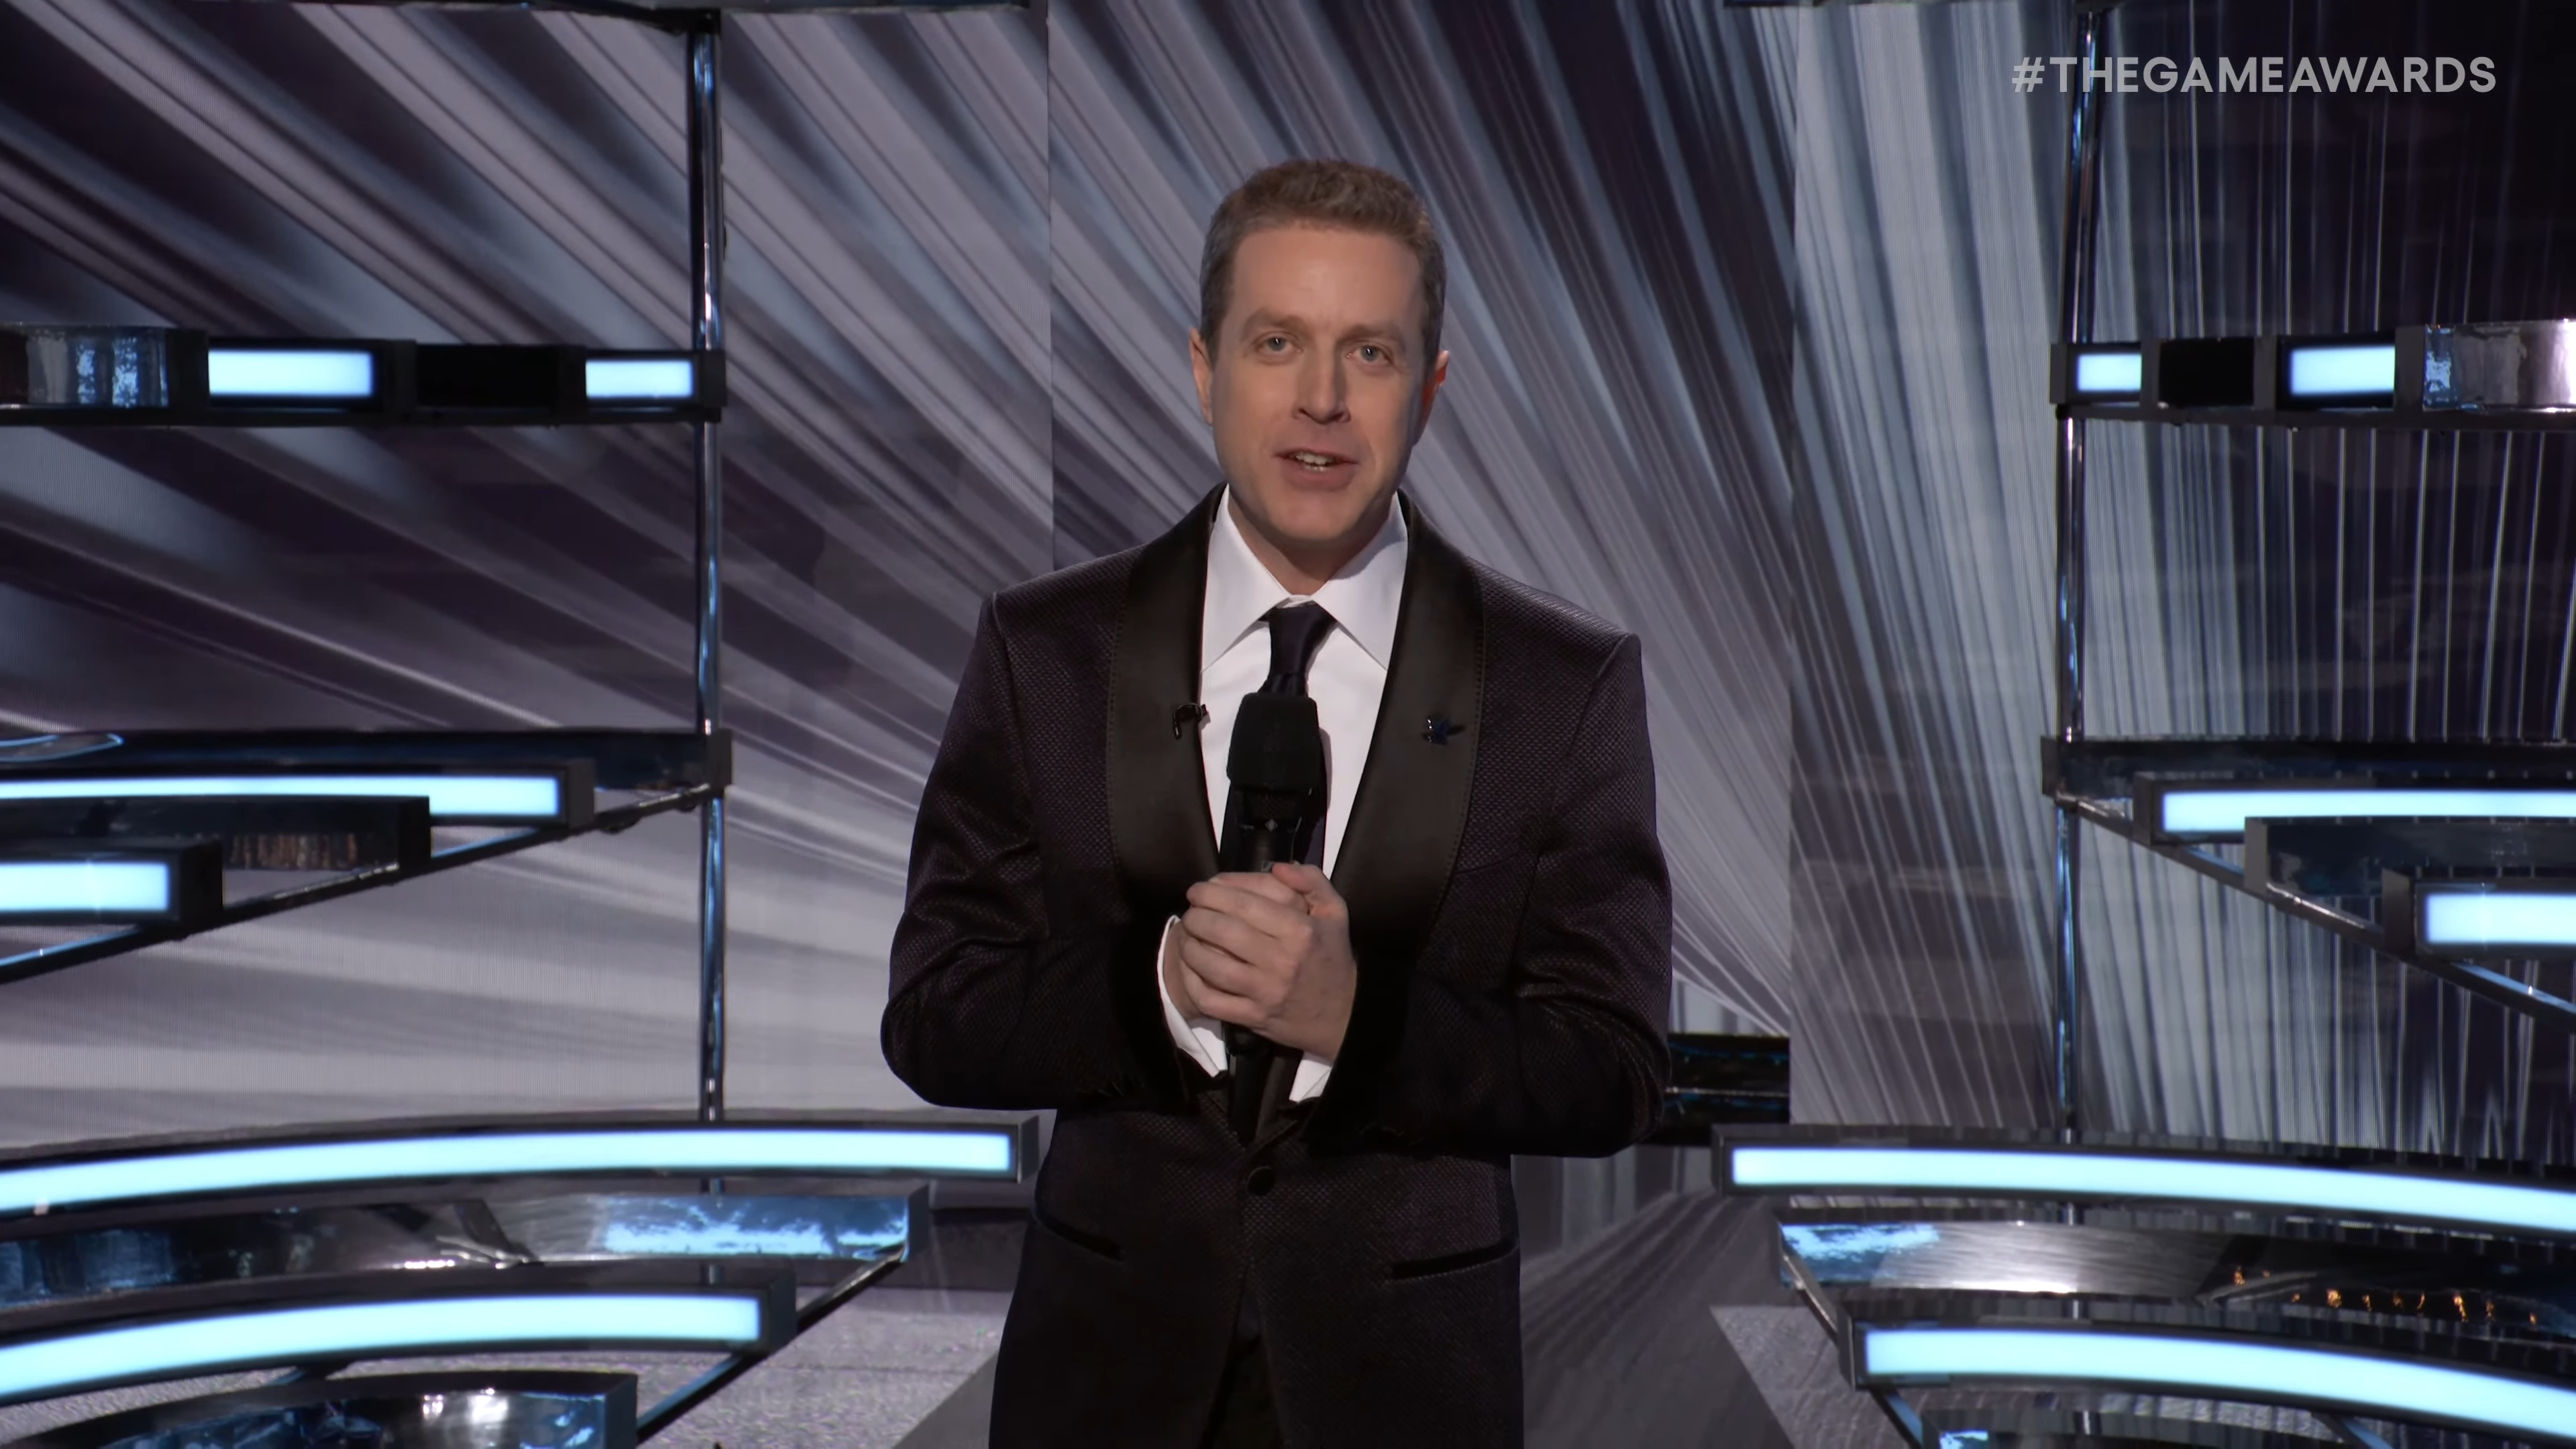 The Game Awards' Looks To Combine The Oscars And E3